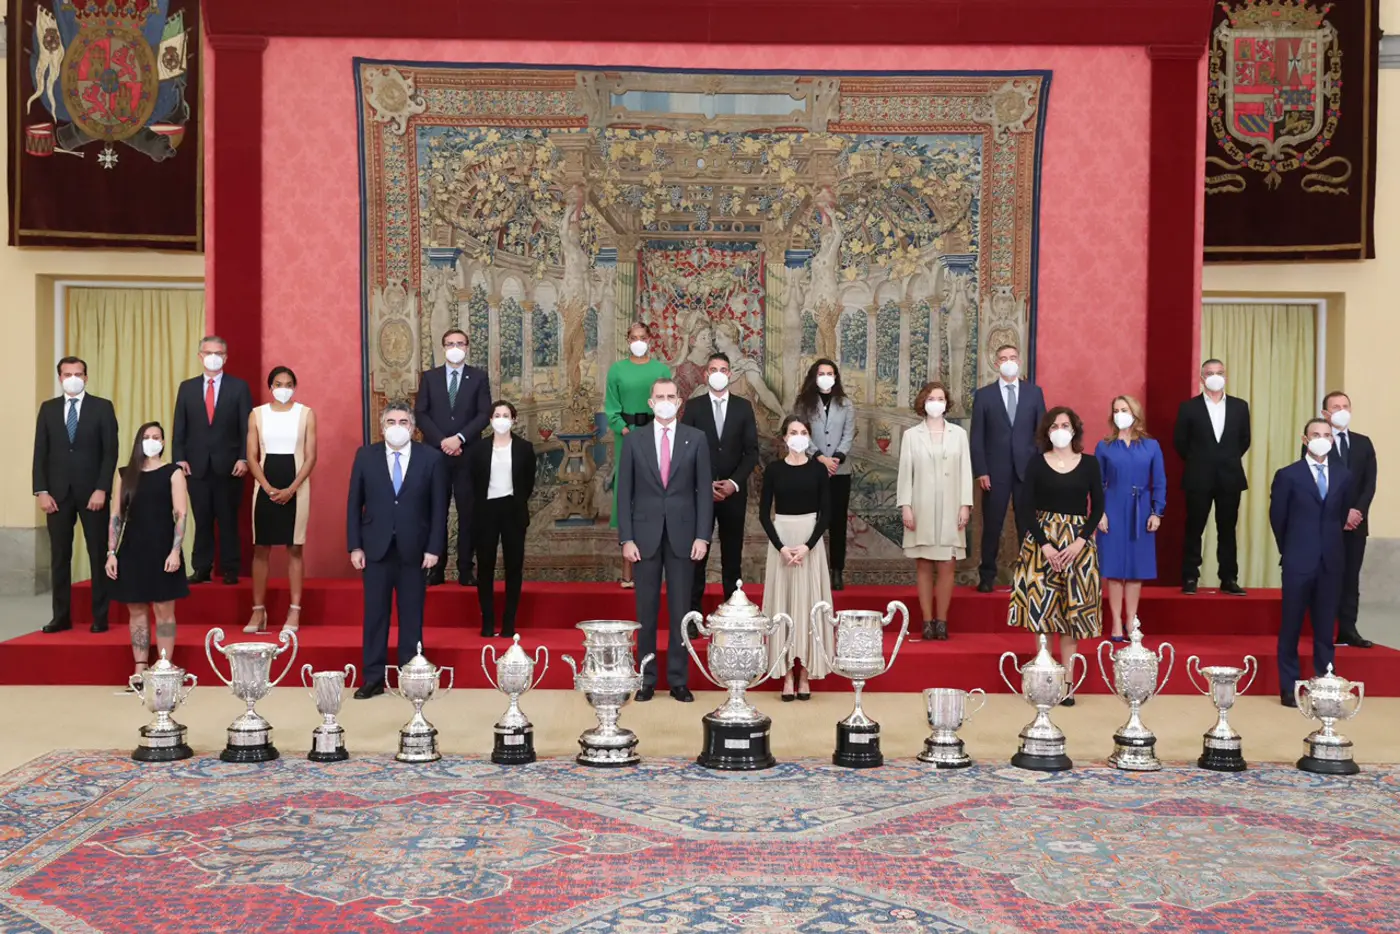 King Felipe and Queen Letizia of Spain presented the annual National Sports Awards at the Royal Palace of El Pardo in Madrid